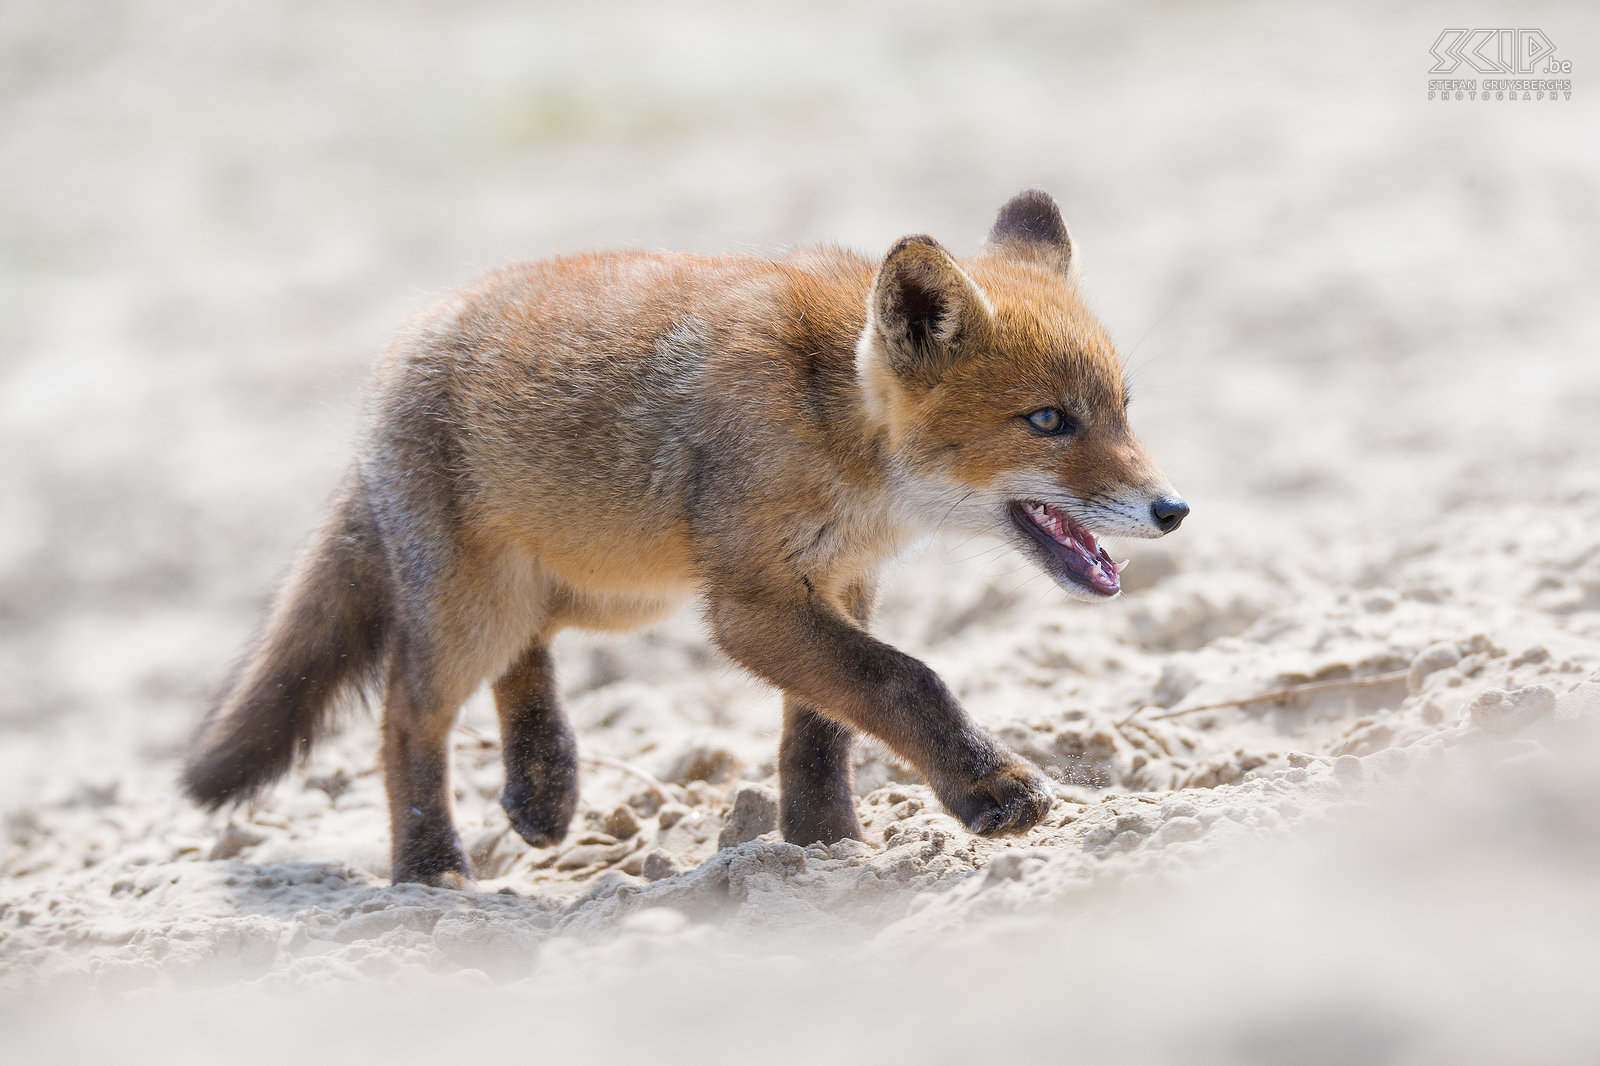 Fox kit in the dunes This fox cub wasn't shy at all and I was able to lay down to photograph him in the sand dunes. Red foxes are omnivores with a highly varied diet; from small rodents like voles, mice, squirrels, birds, lizards to insects, other invertebrates.<br />
 Stefan Cruysberghs